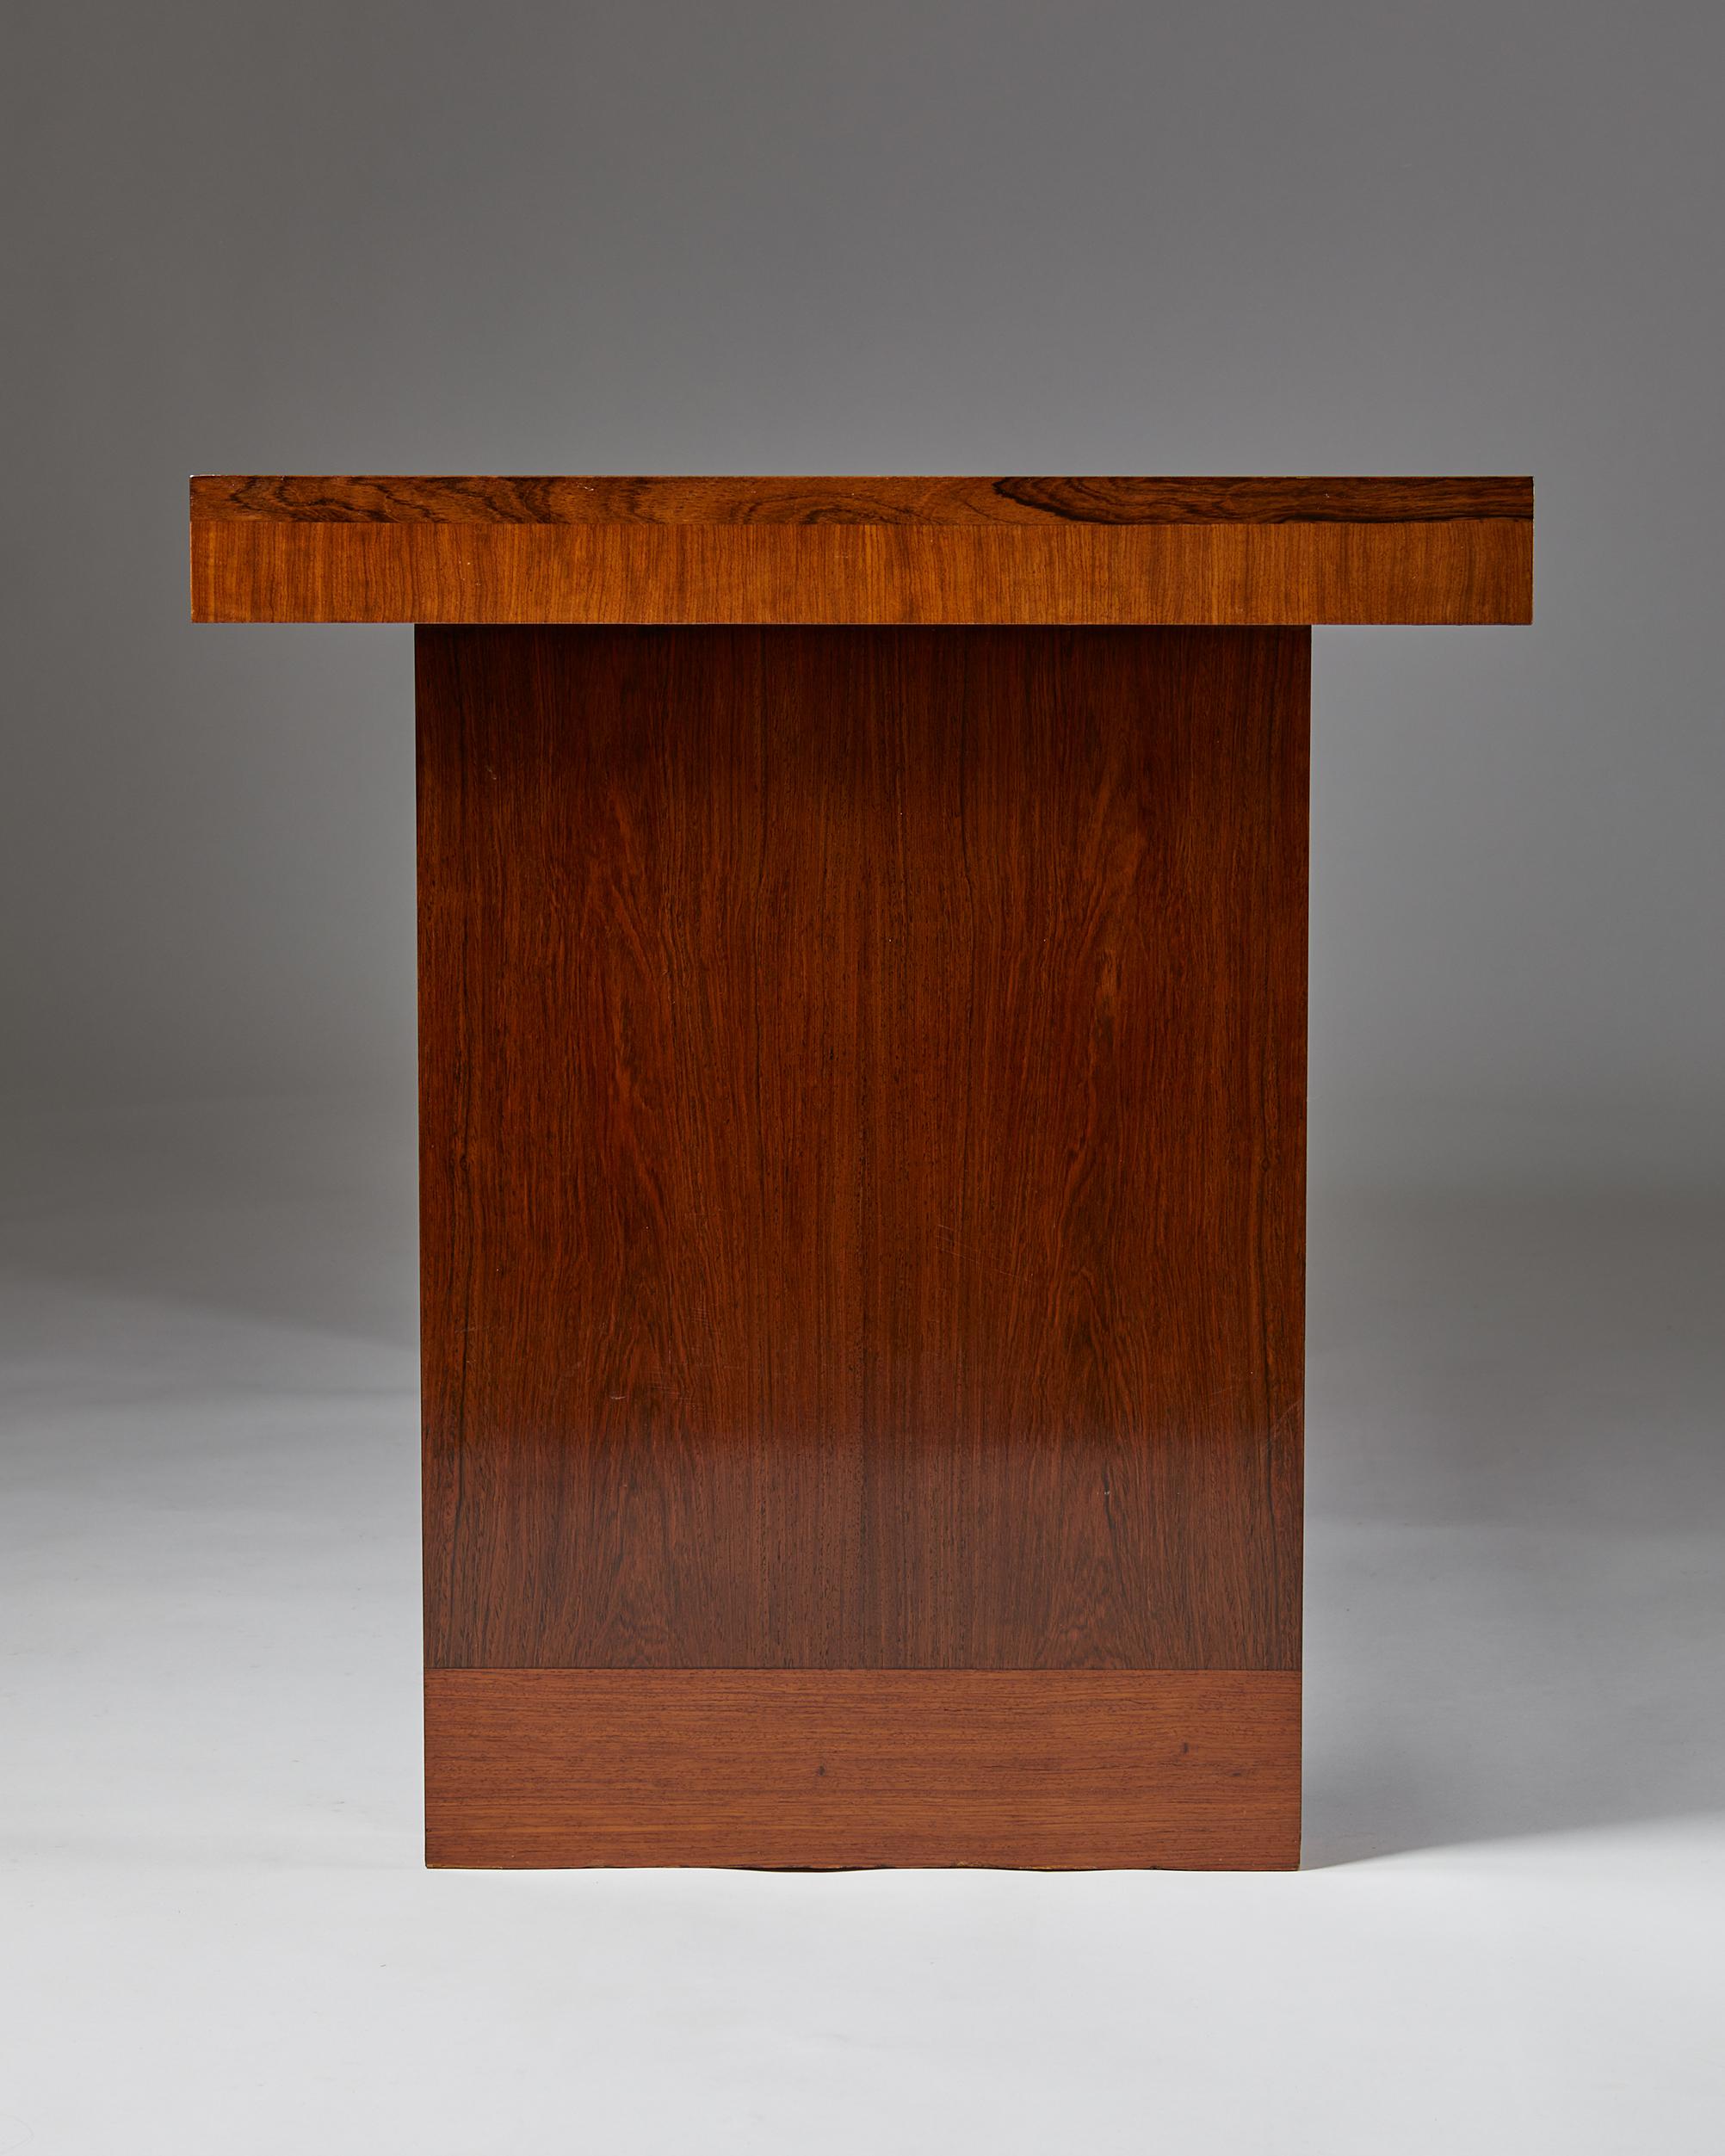 Mid-20th Century Desk made of Mahogany and Walnut Designed by Carl Malmsten, Sweden, 1934